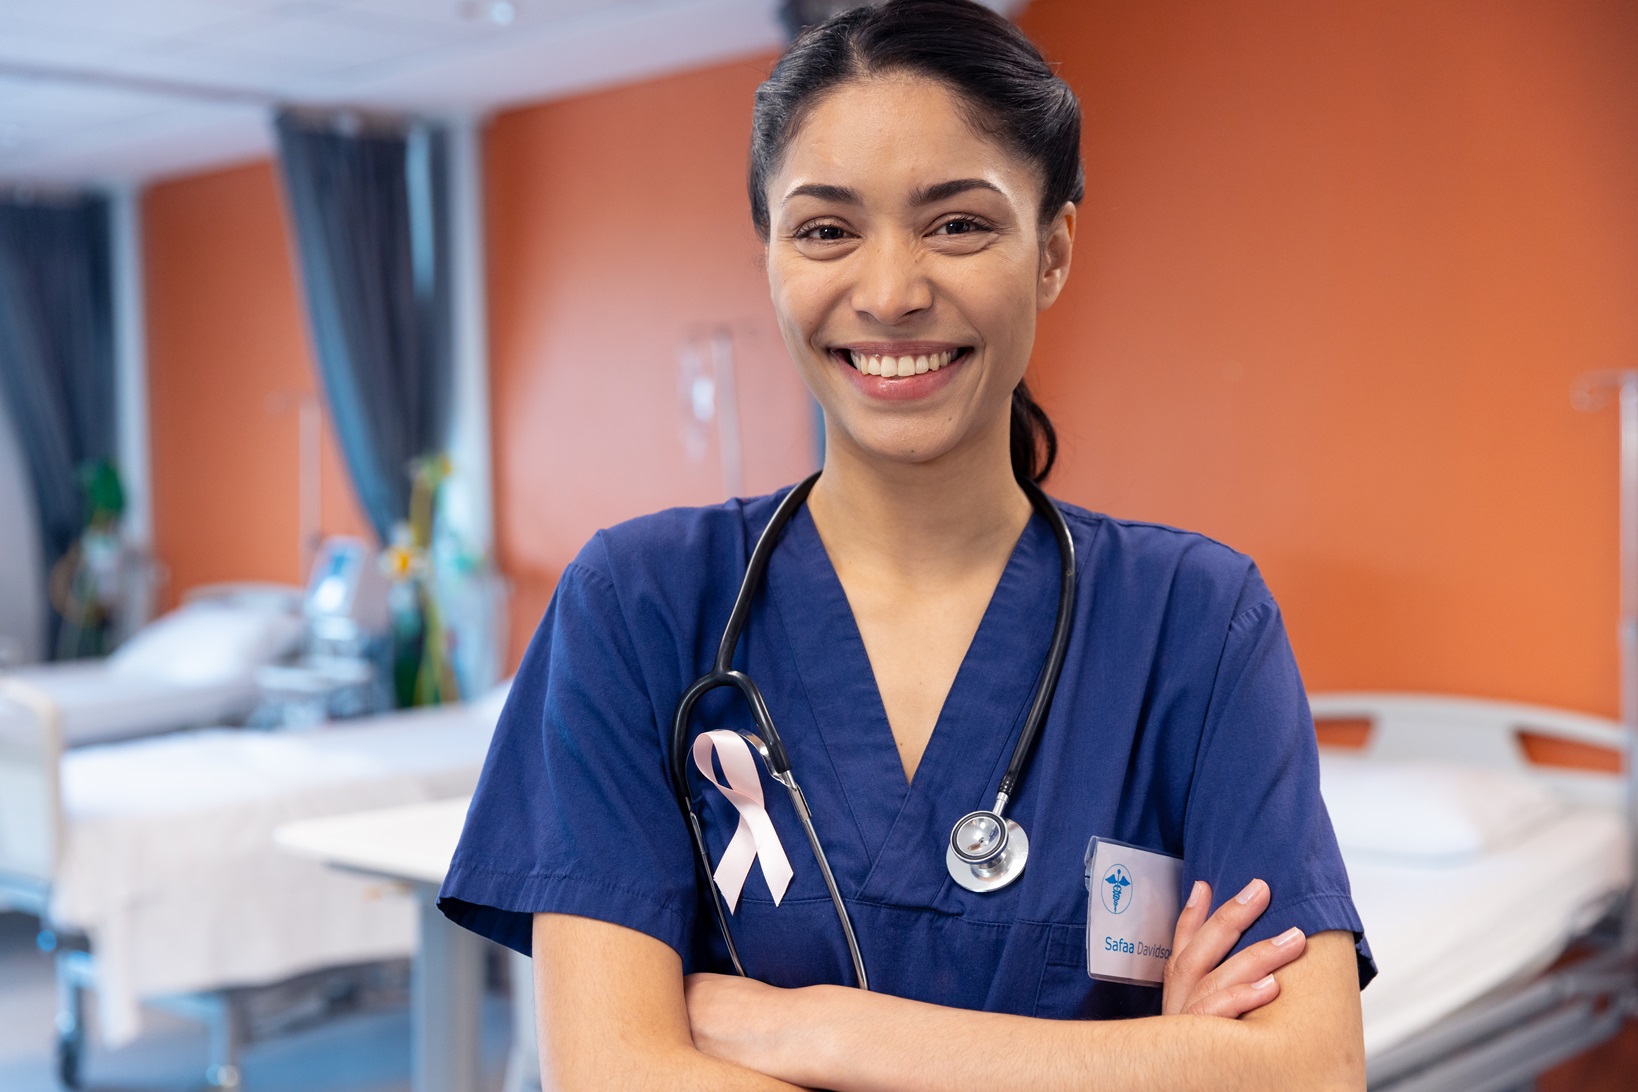 How To Grow Your Career In Nursing